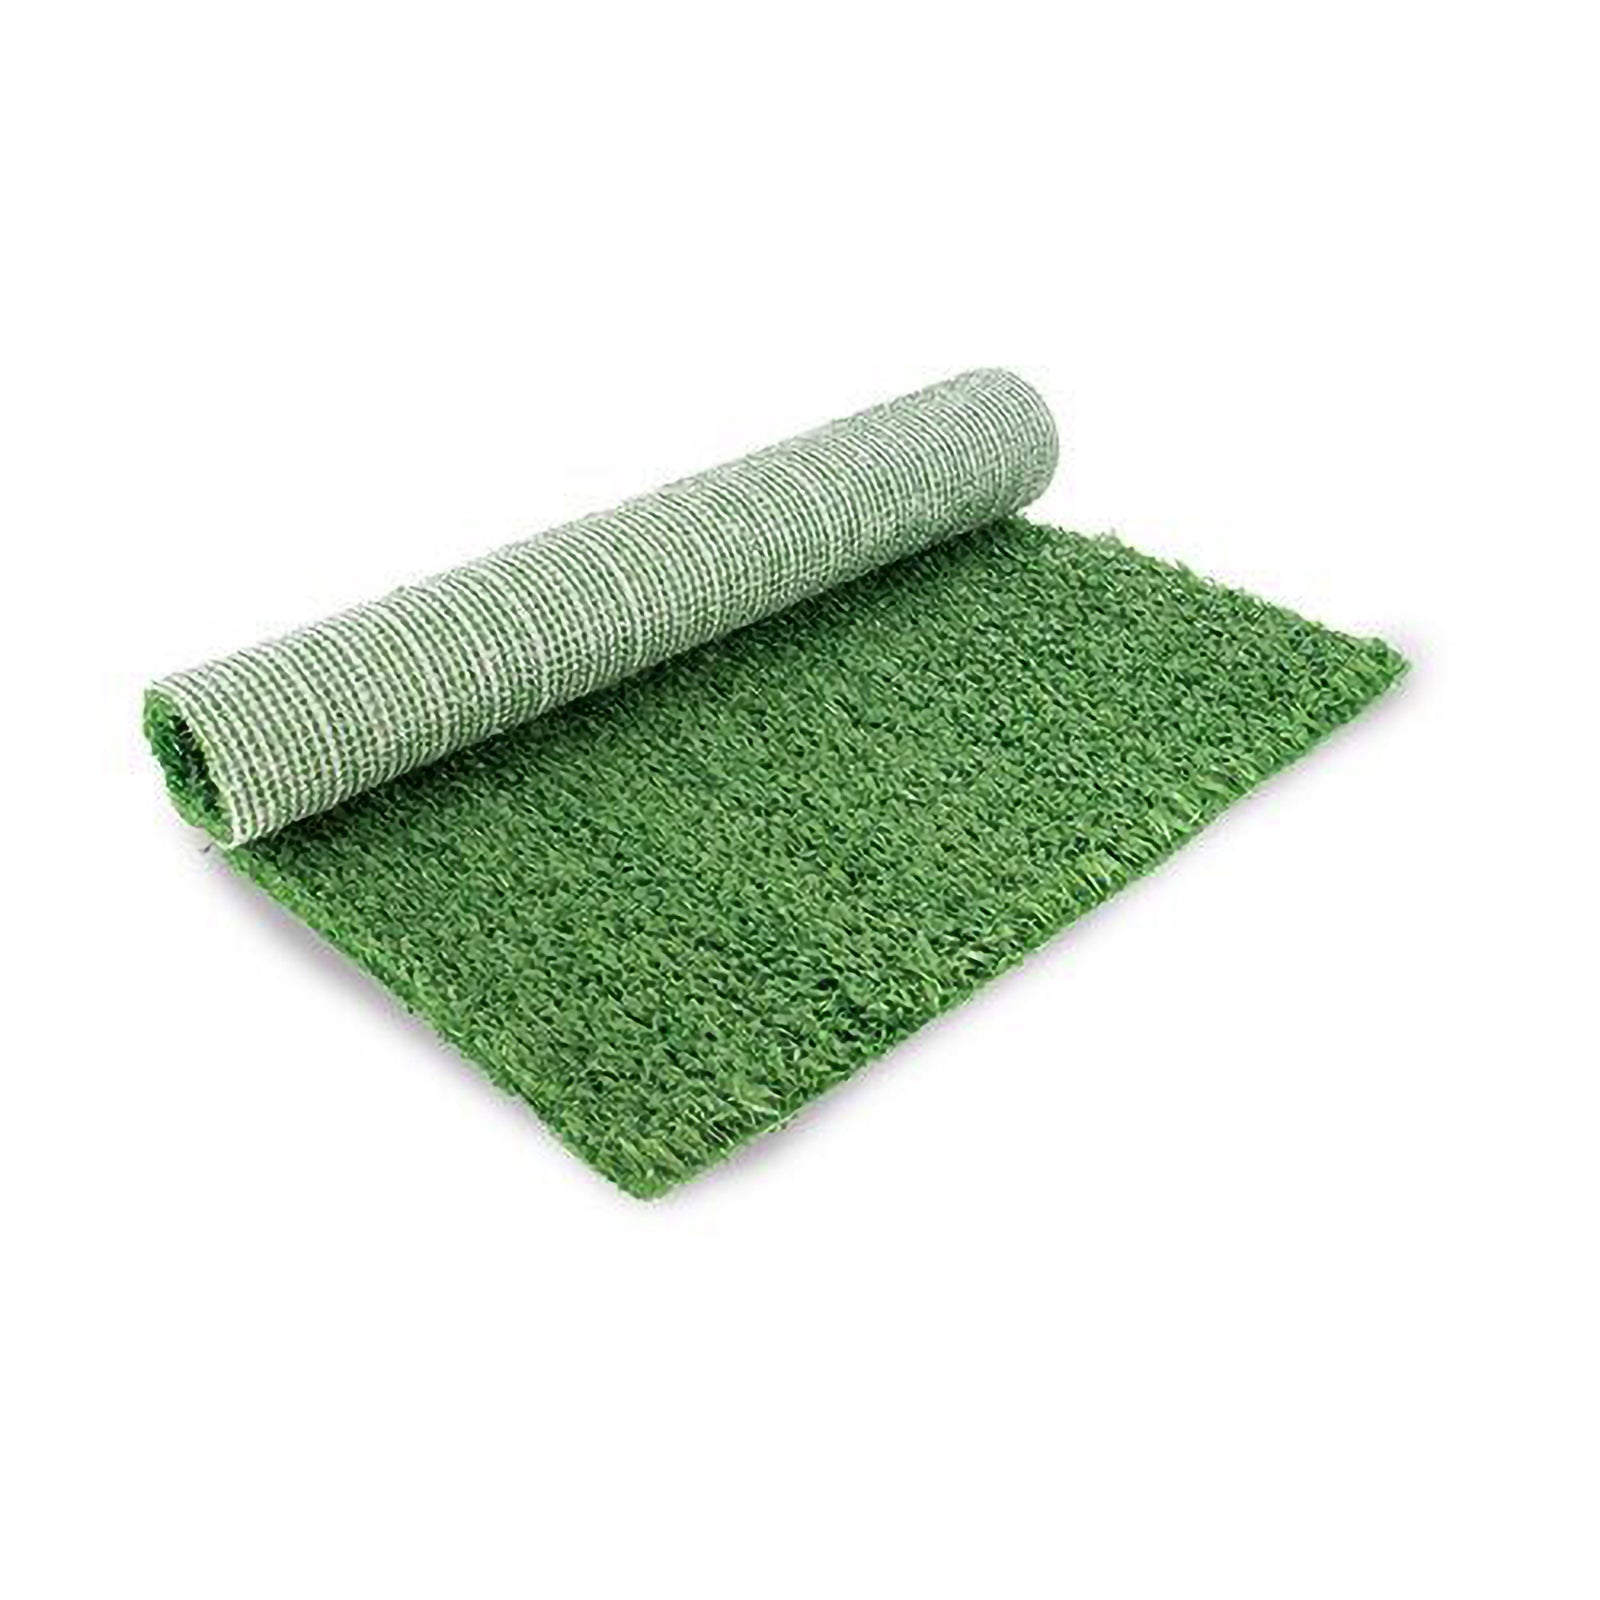 PooWee Potty Replacement Grass